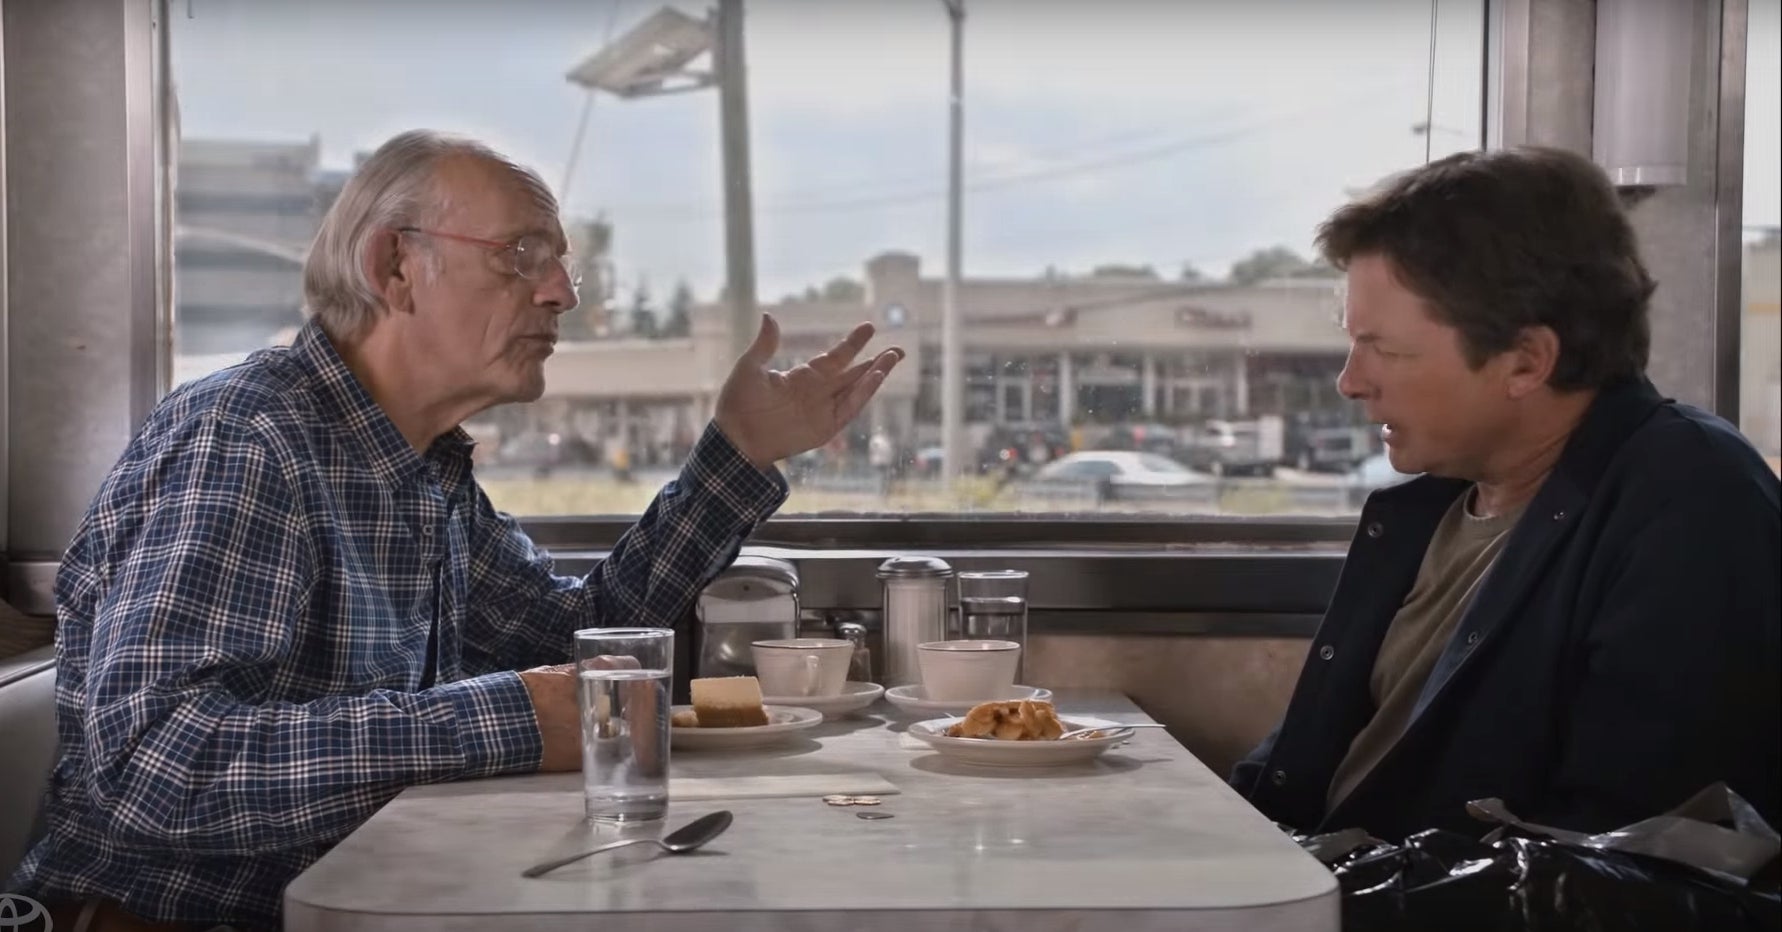 Michael J. Fox and Christopher Lloyd discussing Back to the Future II